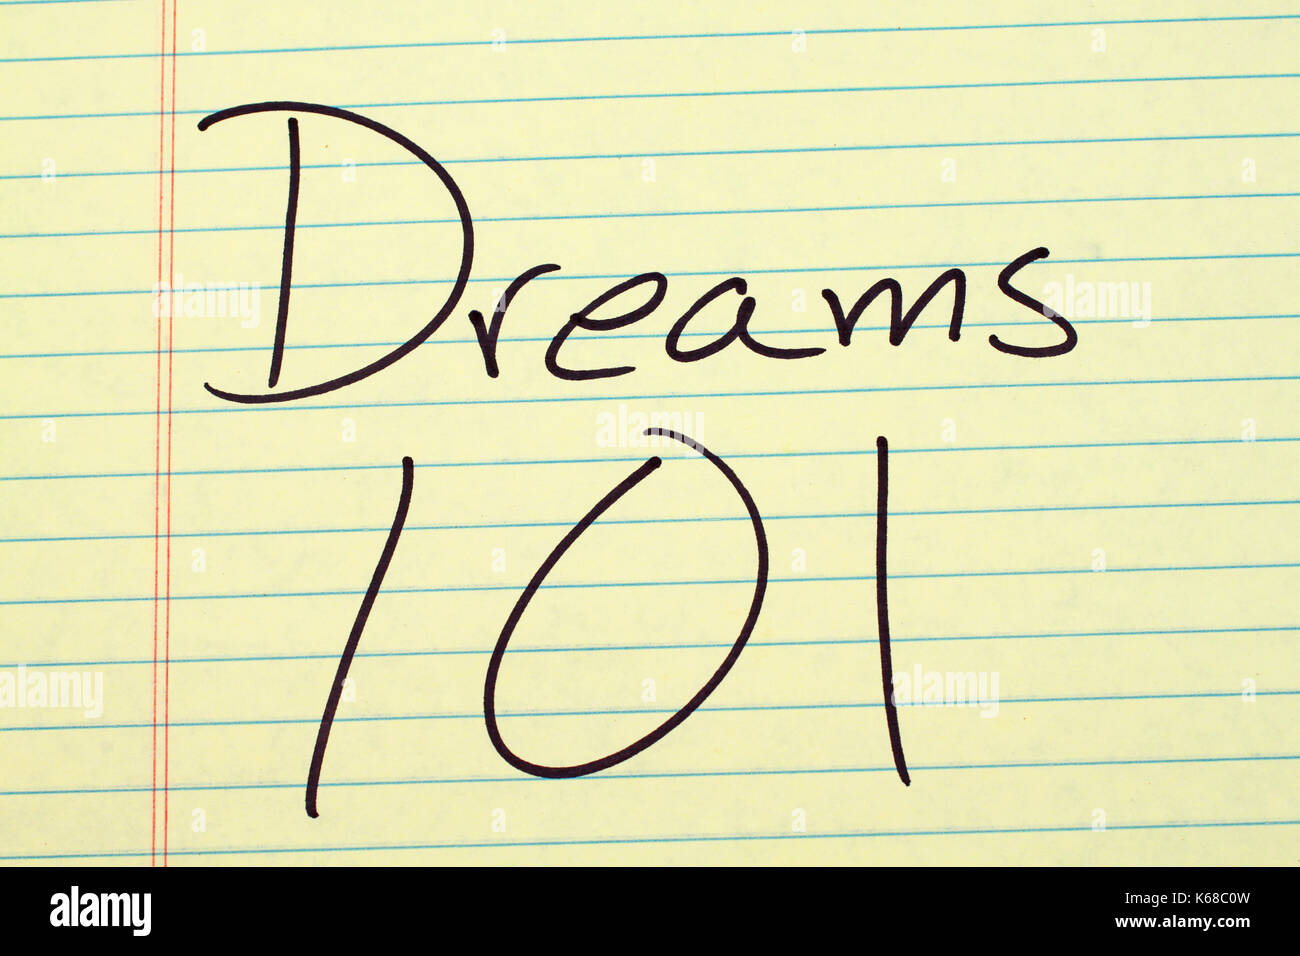 The words 'Dreams 101' on a yellow legal pad Stock Photo